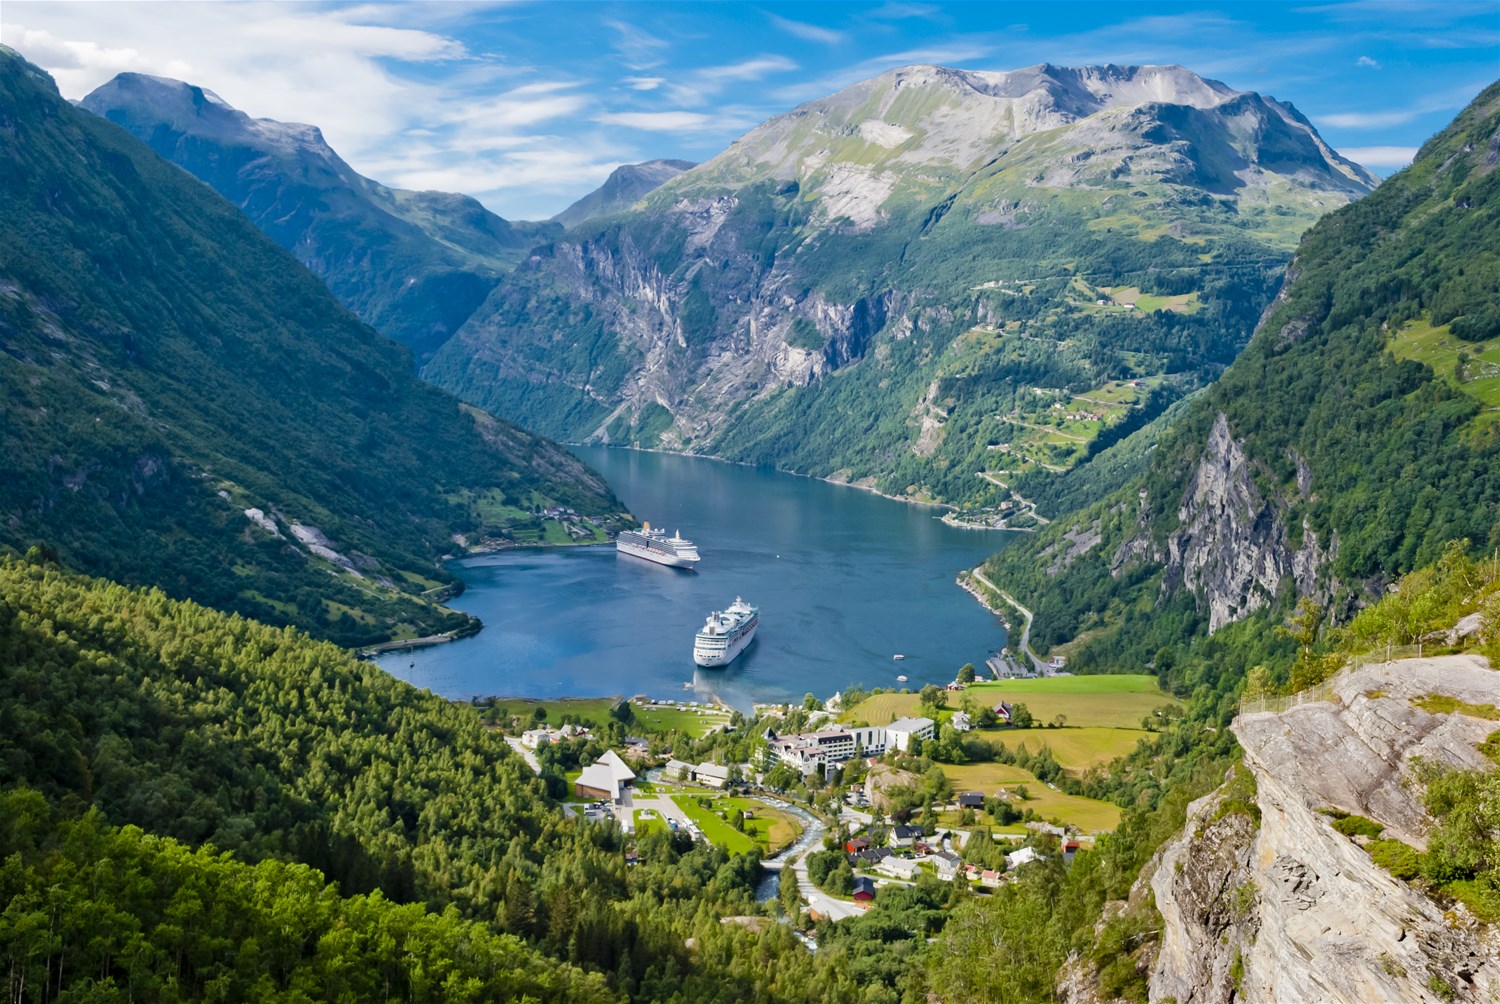 norway cruise best time